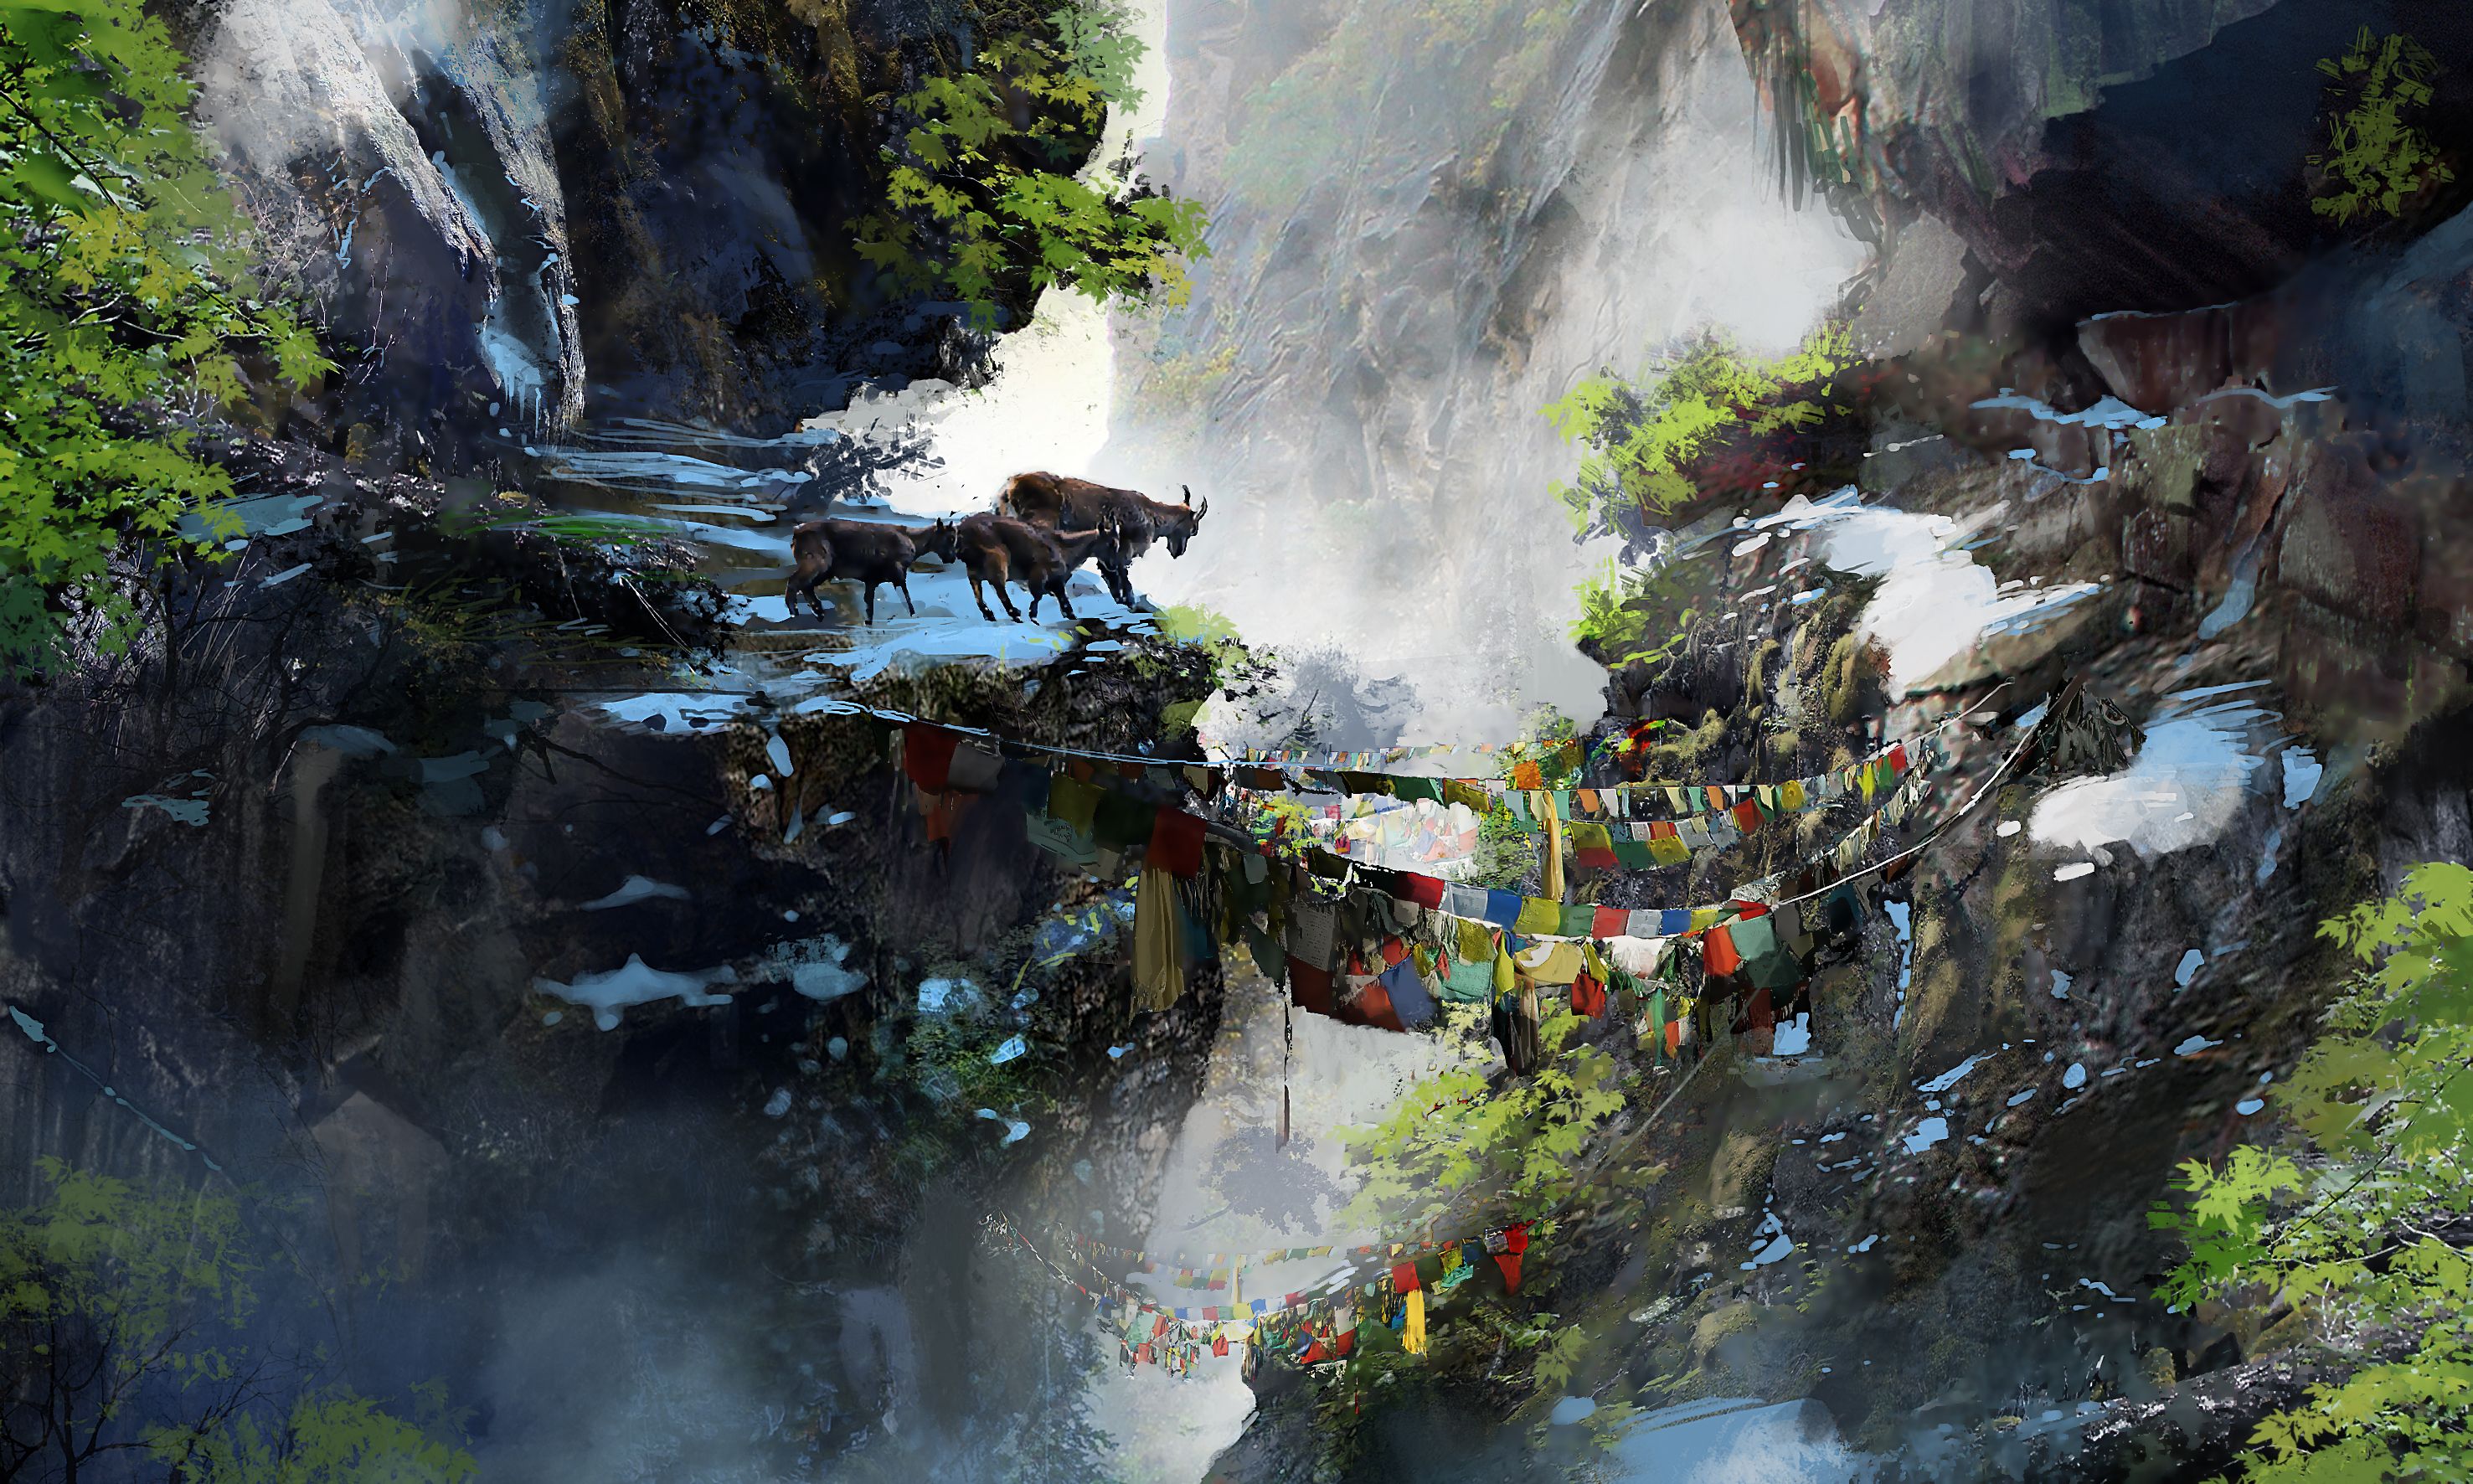 uplay pc installer for far cry 4